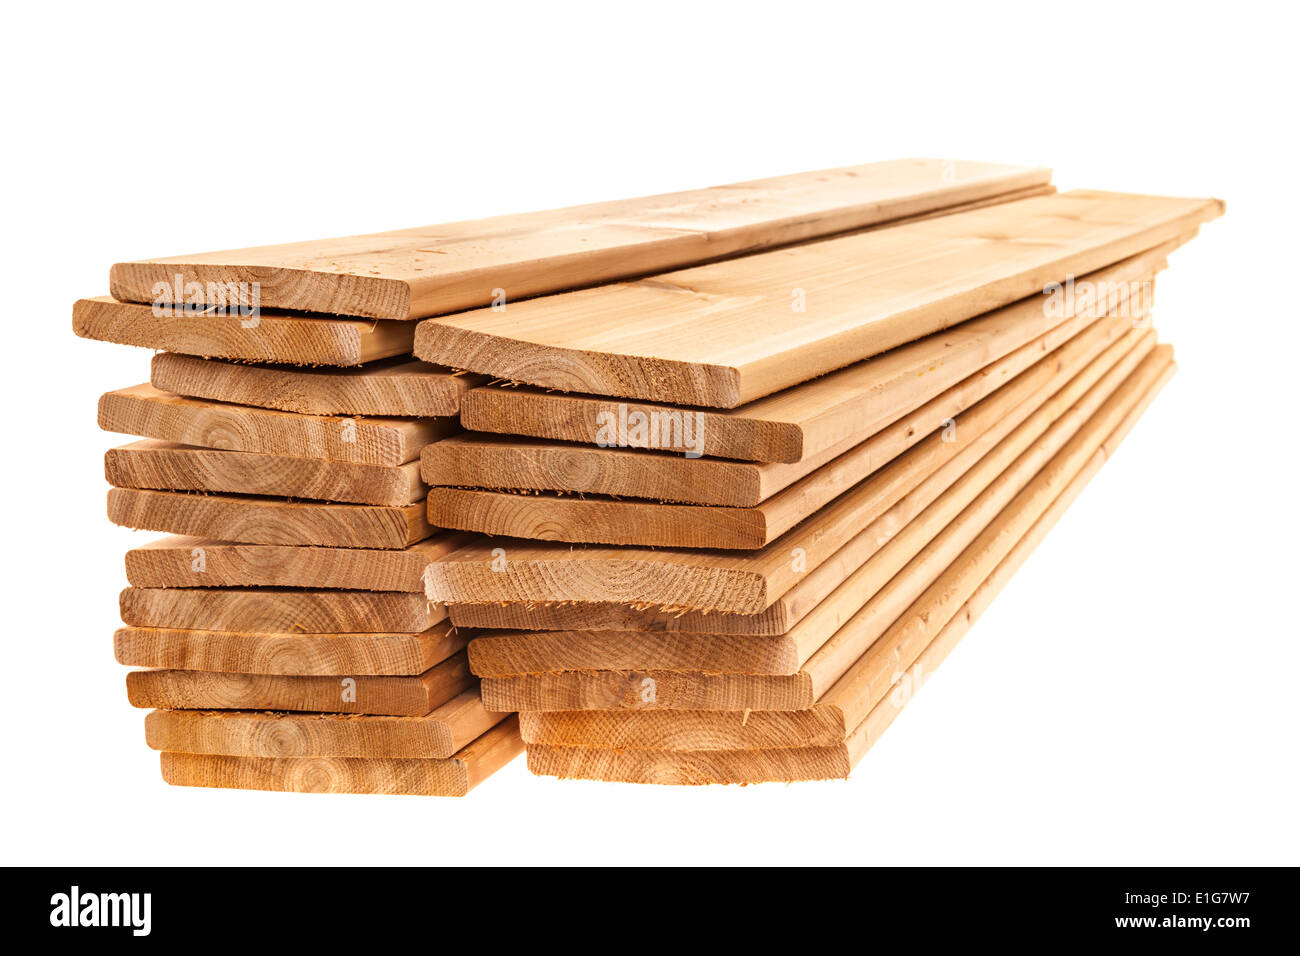 Stacks of cedar one by six inch wood planks on white background Stock Photo